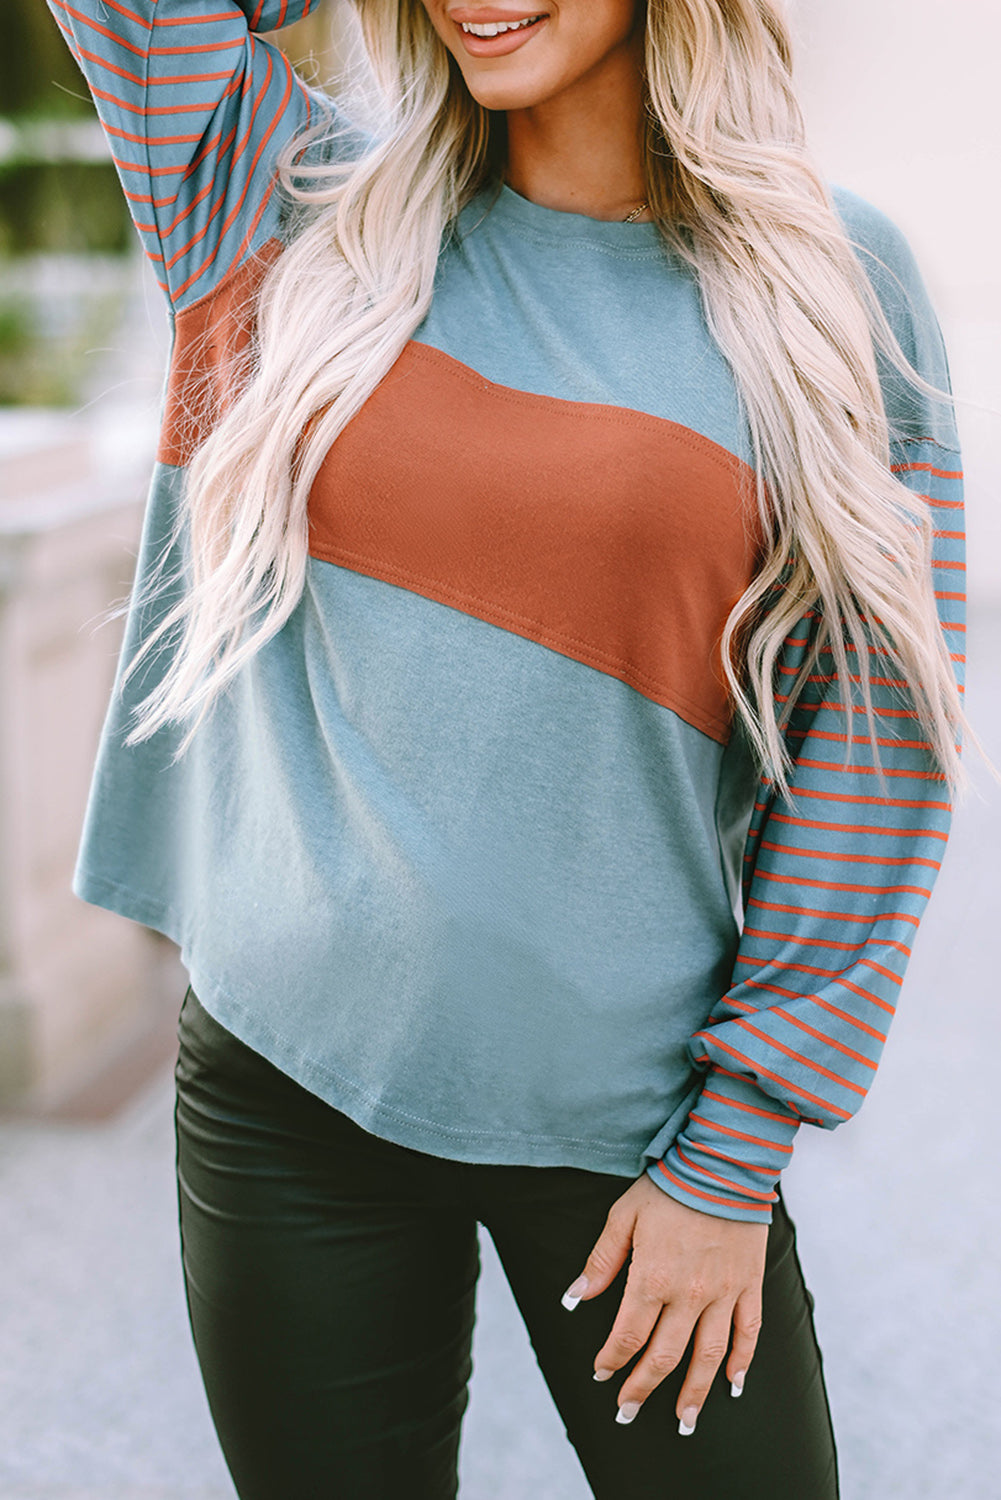 Misty Blue Or Coral Stylish Top